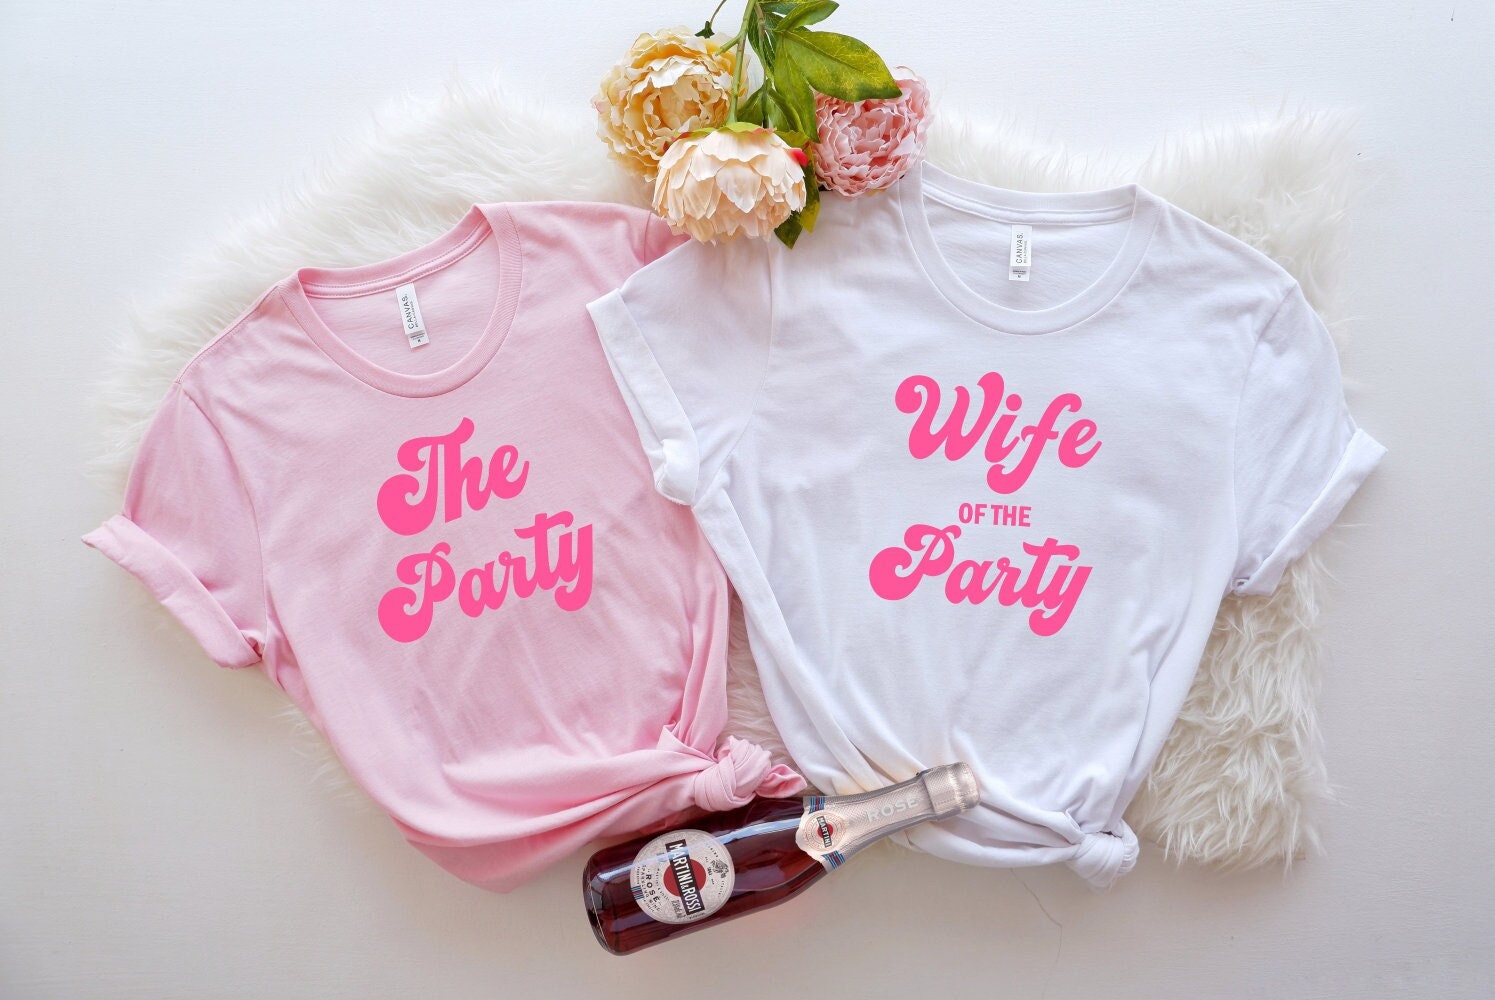 Wife of the party bachelorette party shirt tan